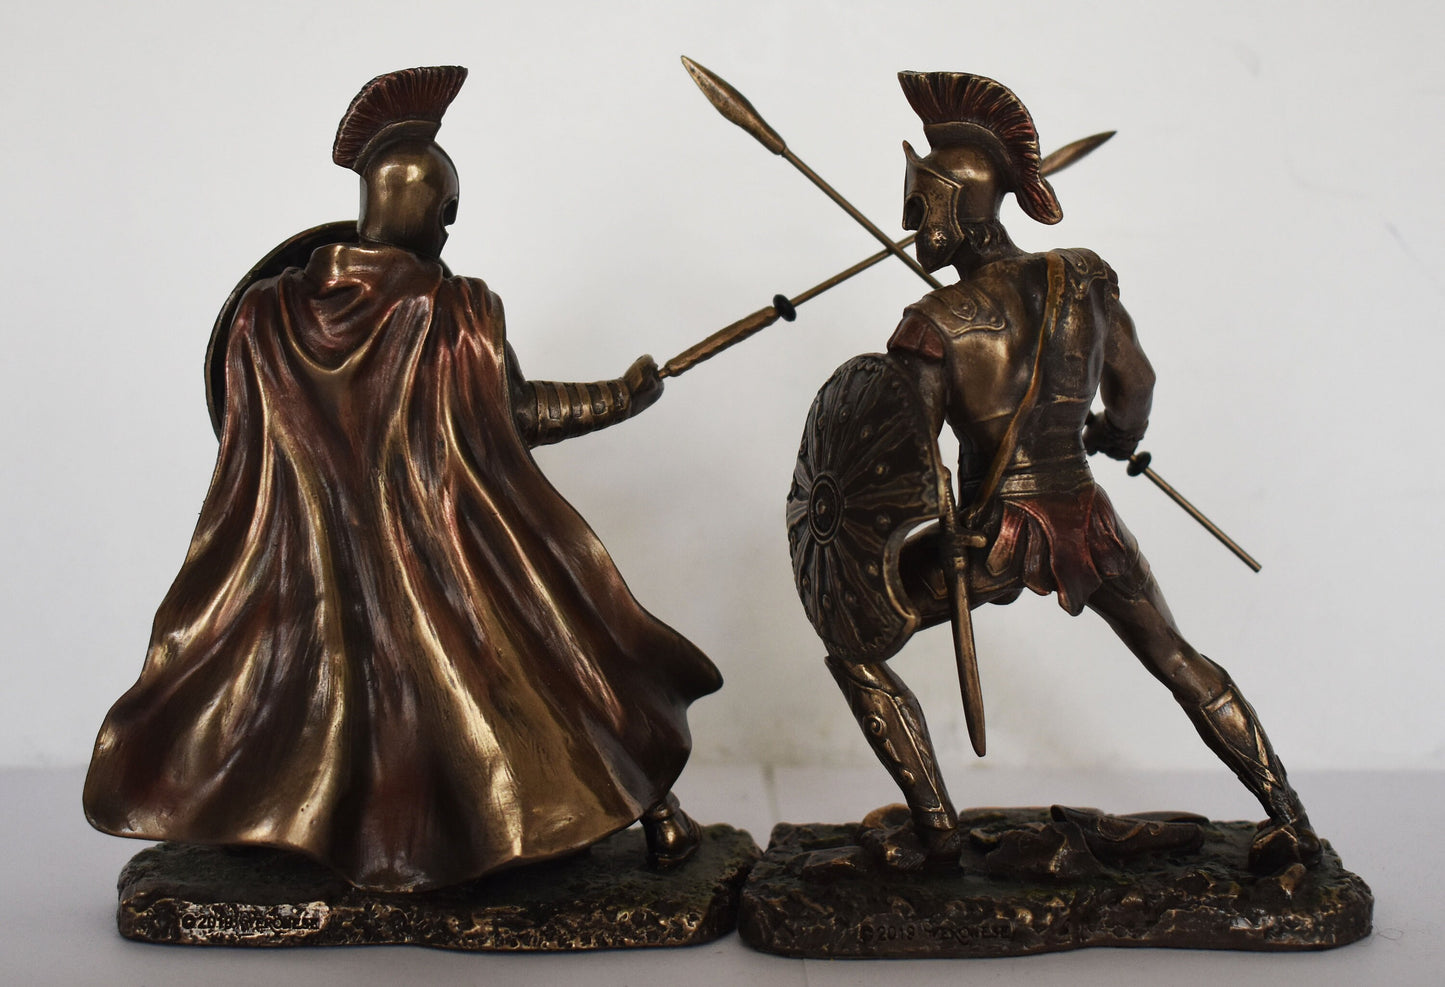 Achilles Hector Fight Set - Small - Trojan War - Homer's Iliad  - Two Paths to Manliness - Cold Cast Bronze Resin